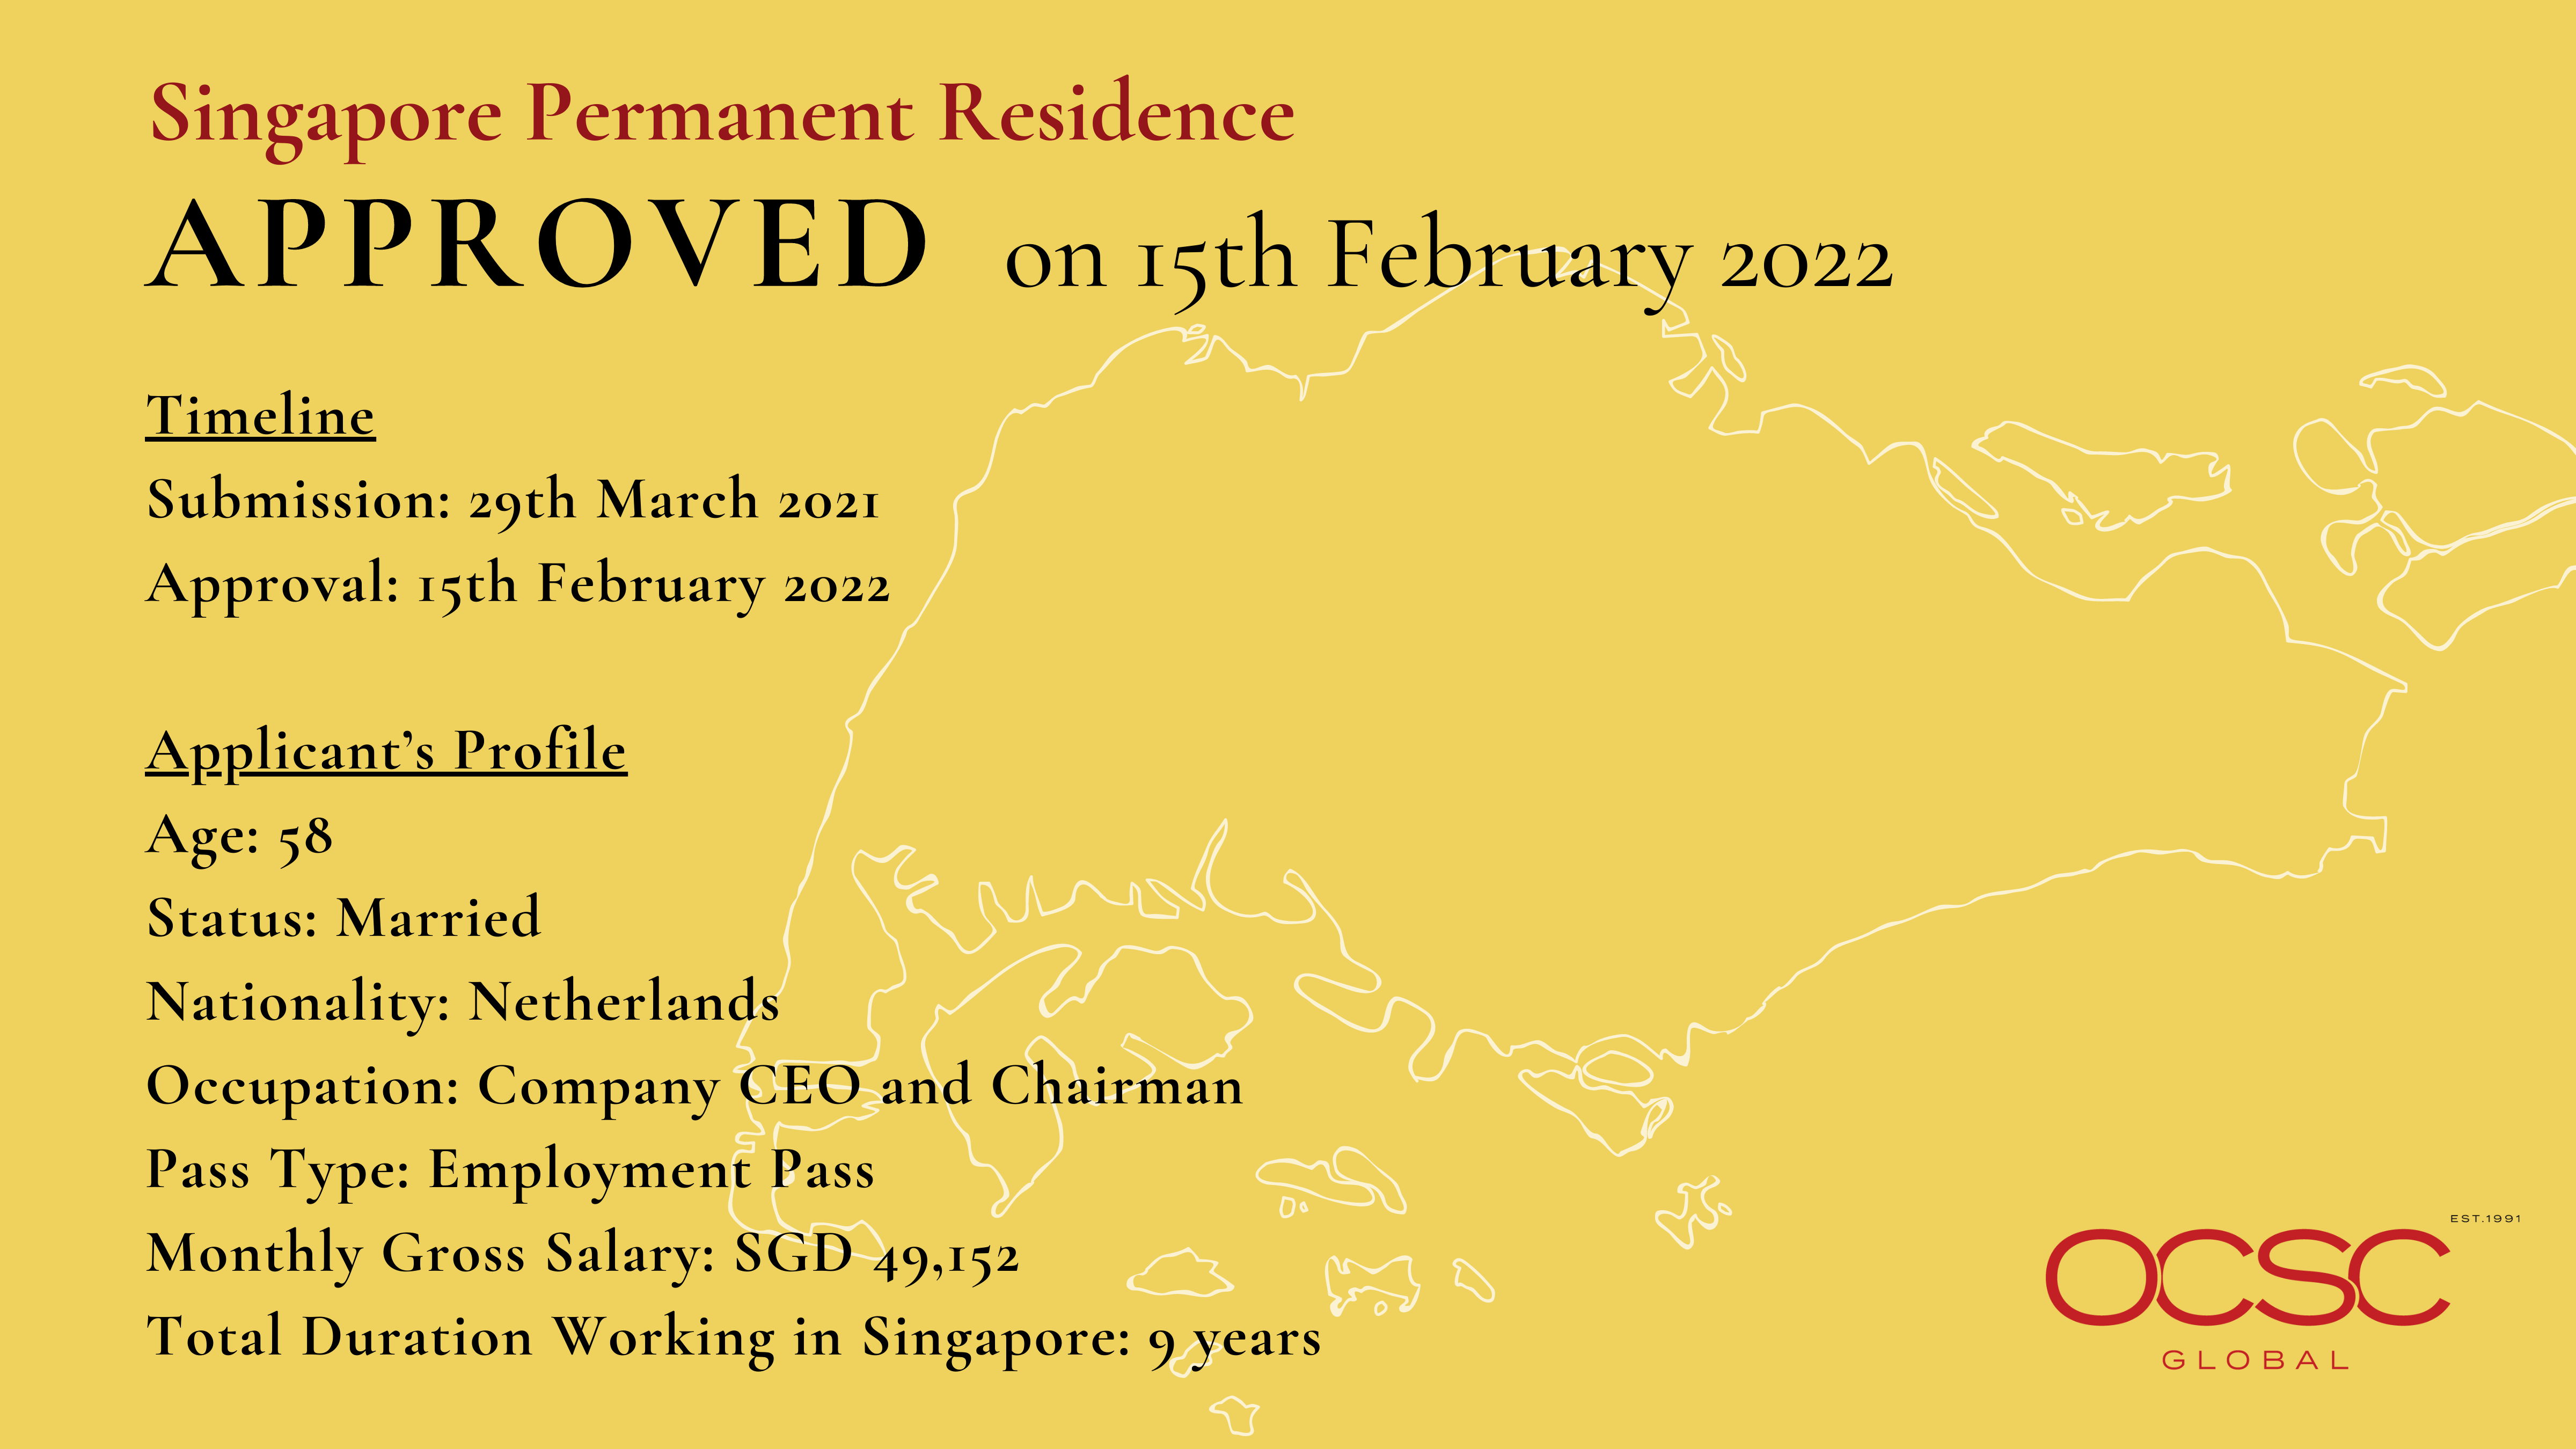 Approval for Singapore Permanent Residence